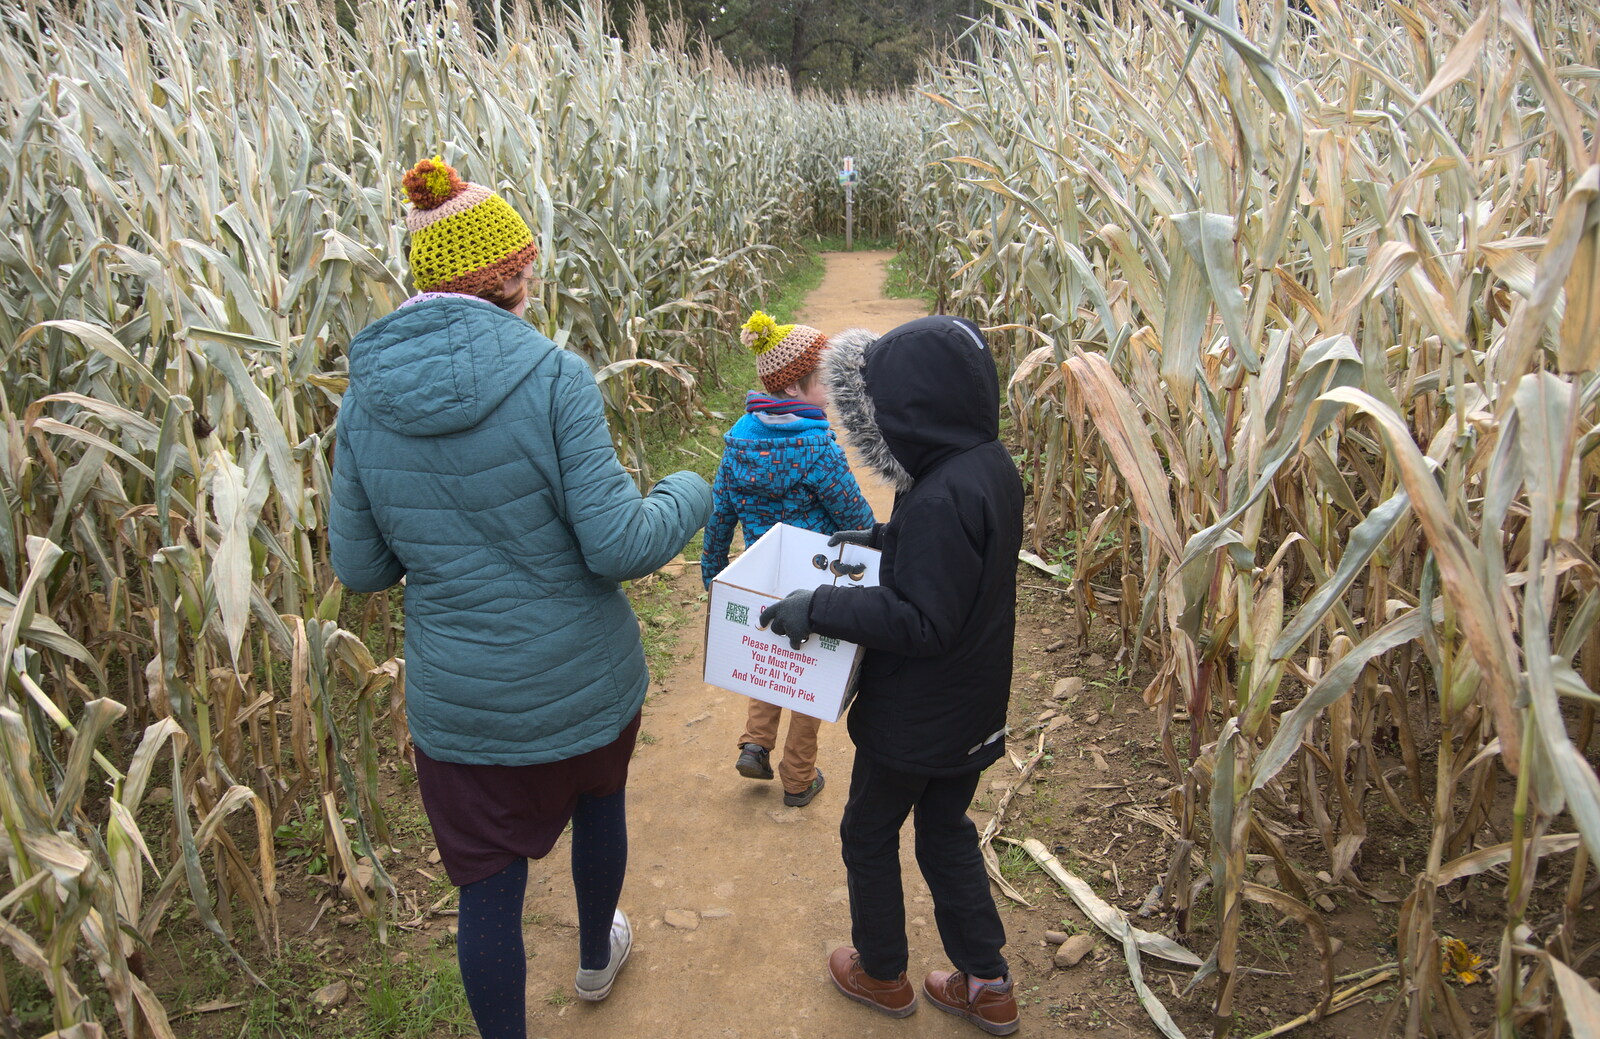 We roam around in the 'beginners' maze from Pumpkin Picking at Alstede Farm, Chester, Morris County, New Jersey - 24th October 2018